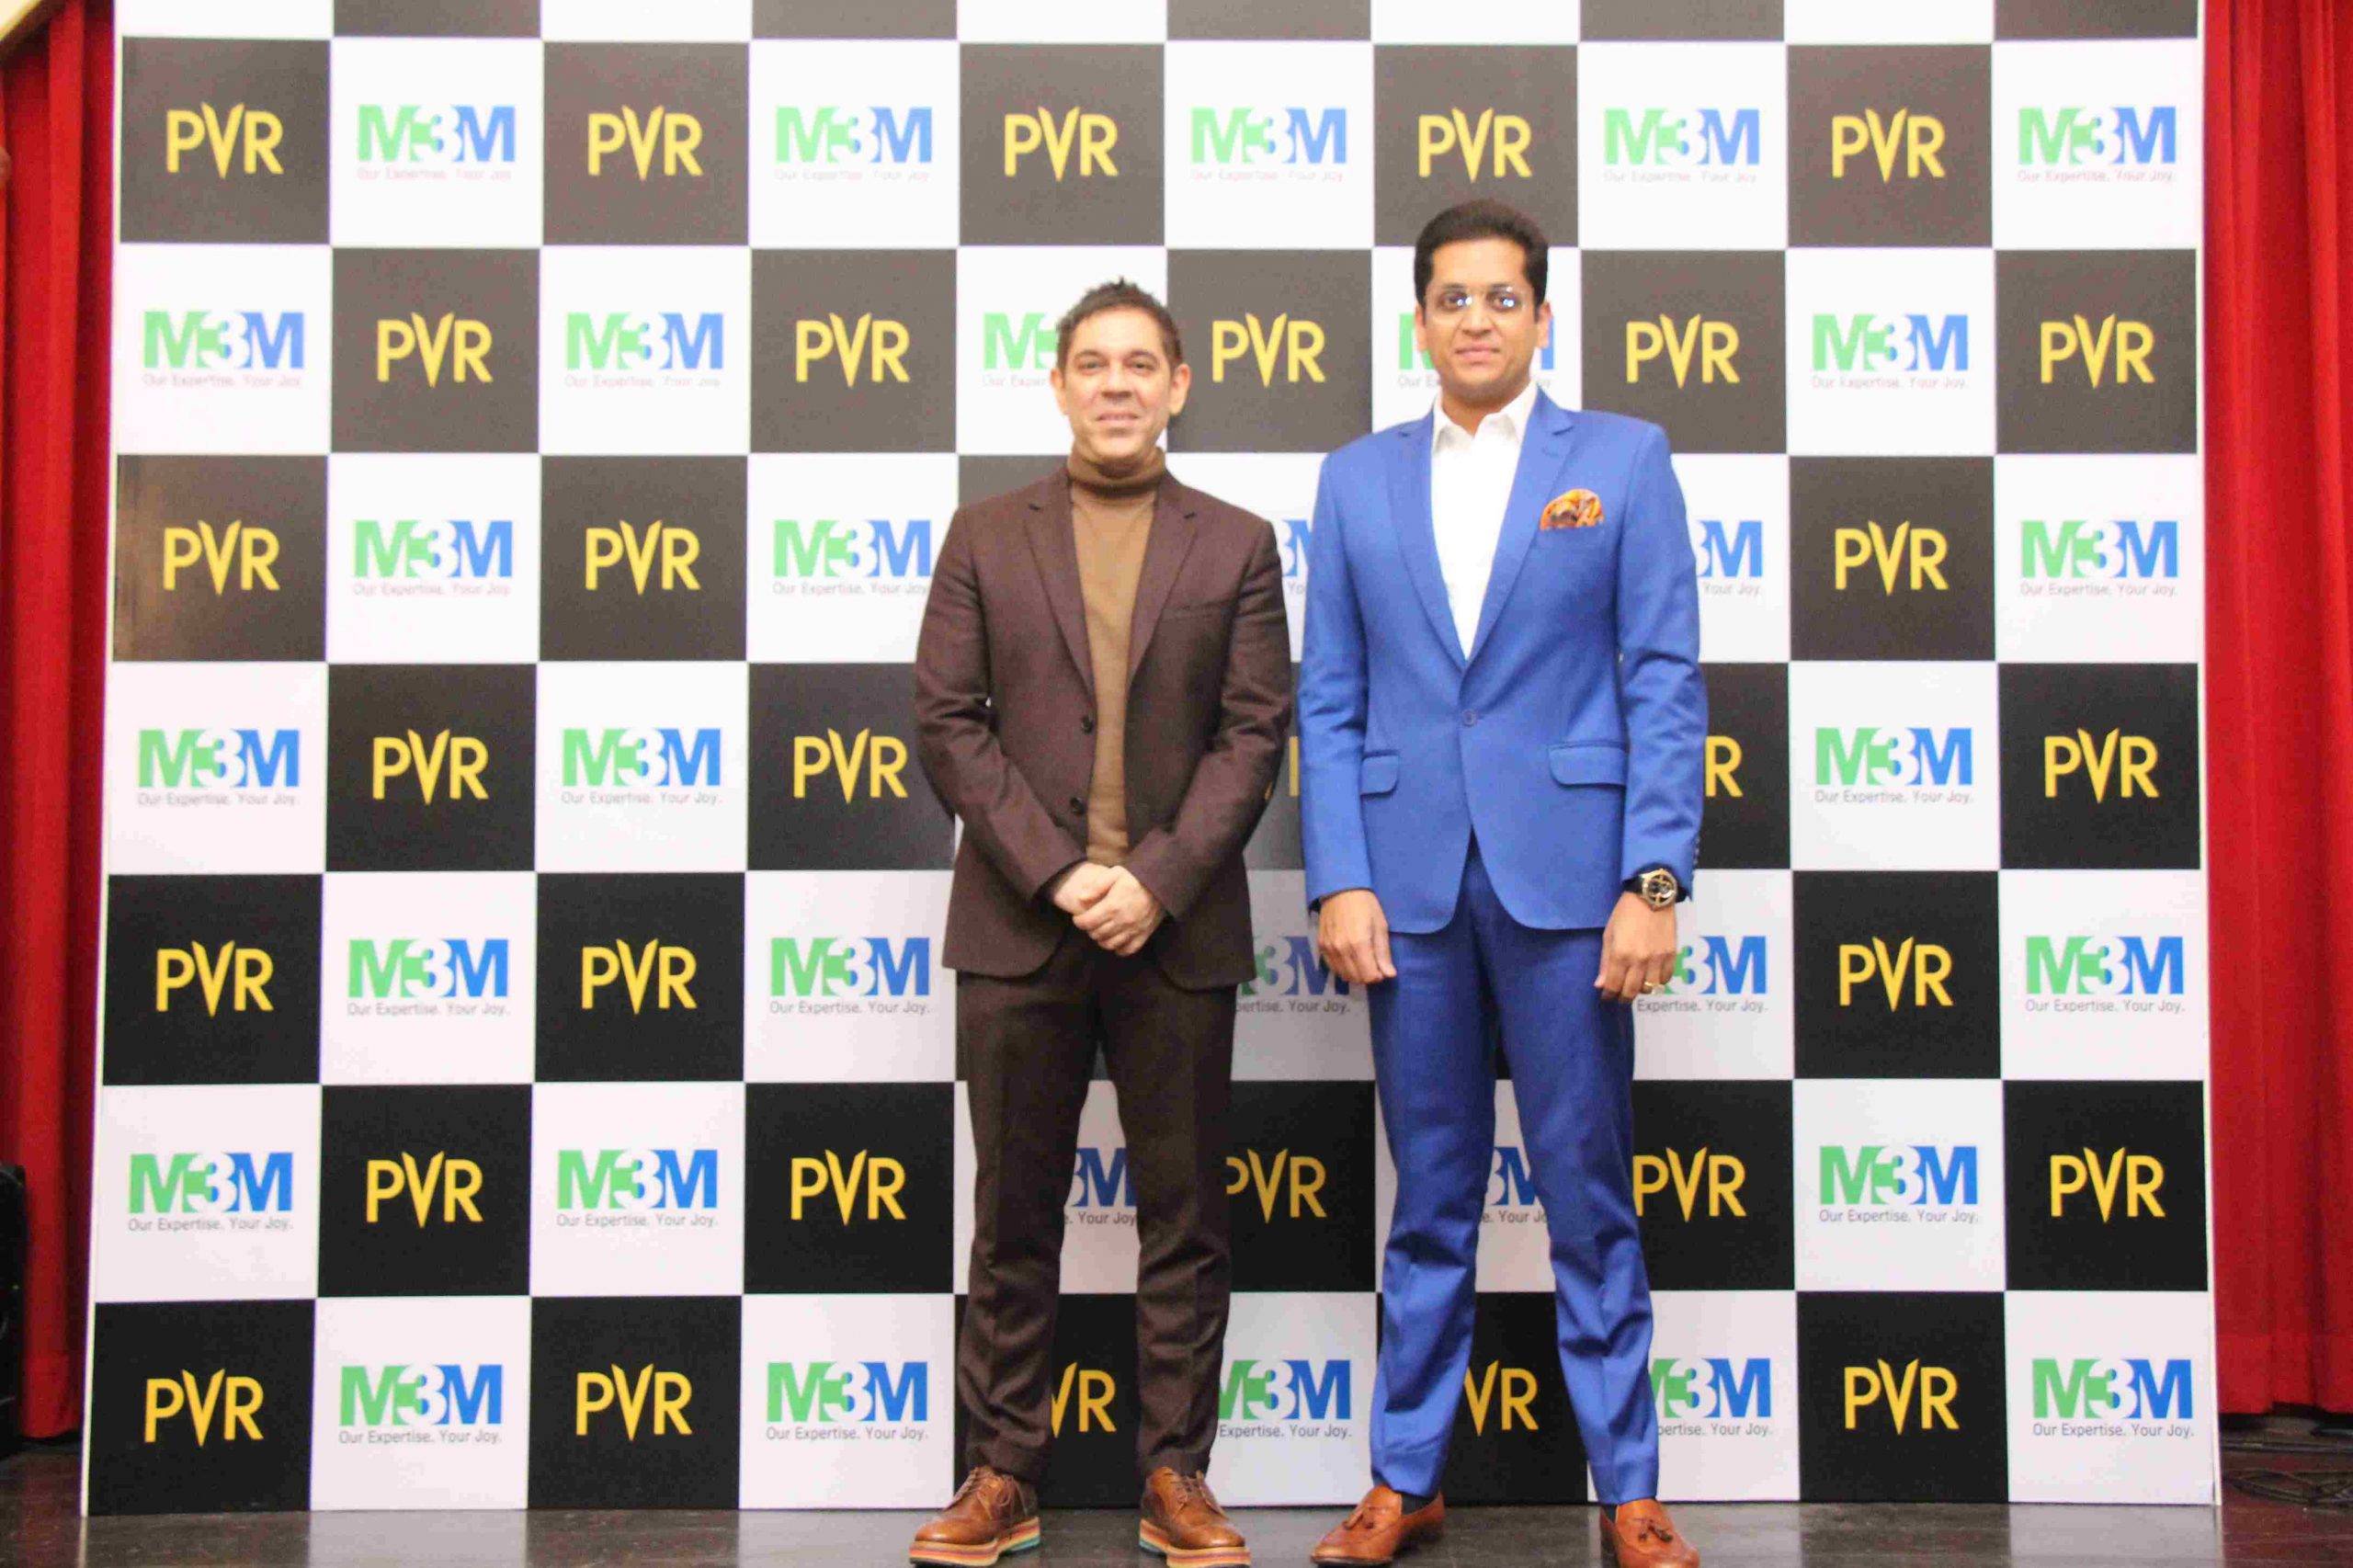 PVR Signs Agreement with M3M India in their largest Retail Project in Gurugram